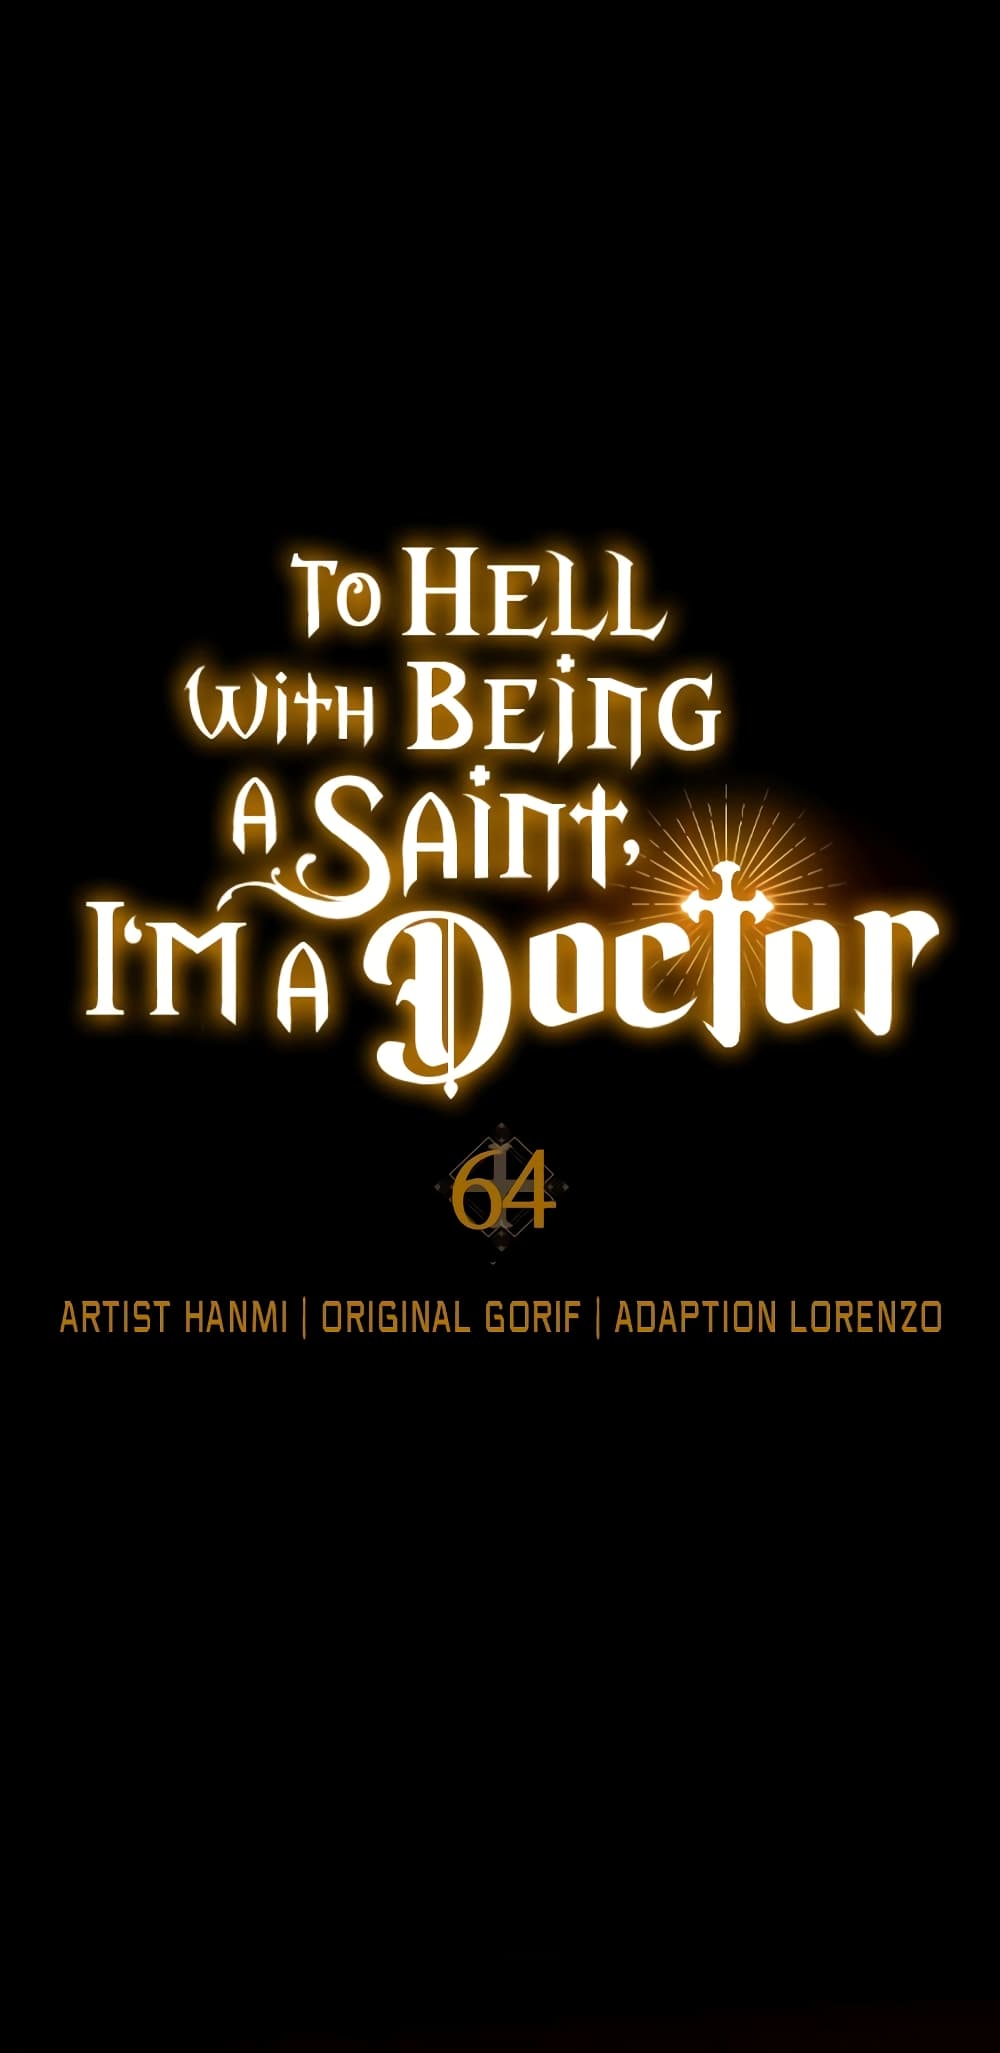 To Hell With Being A Saint, I’m A Doctor 64-64